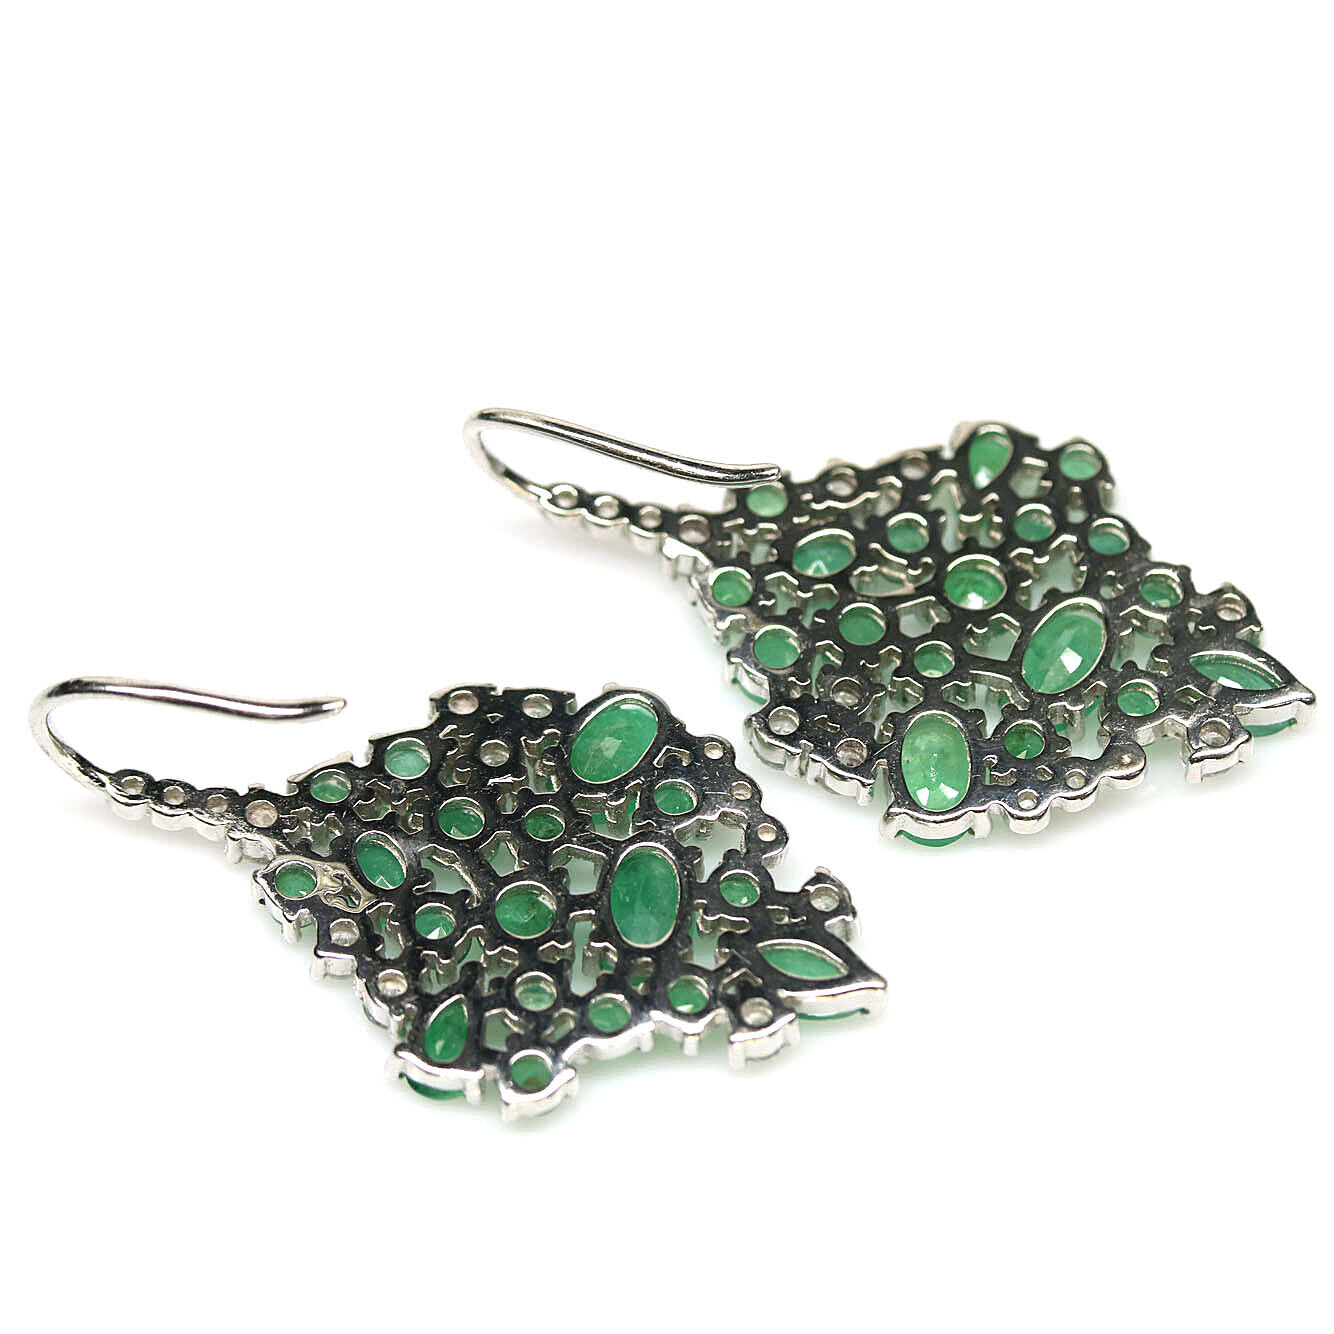 A pair of 925 silver drop earrings set with emeralds and white stones, L. 3.7cm. - Image 3 of 3